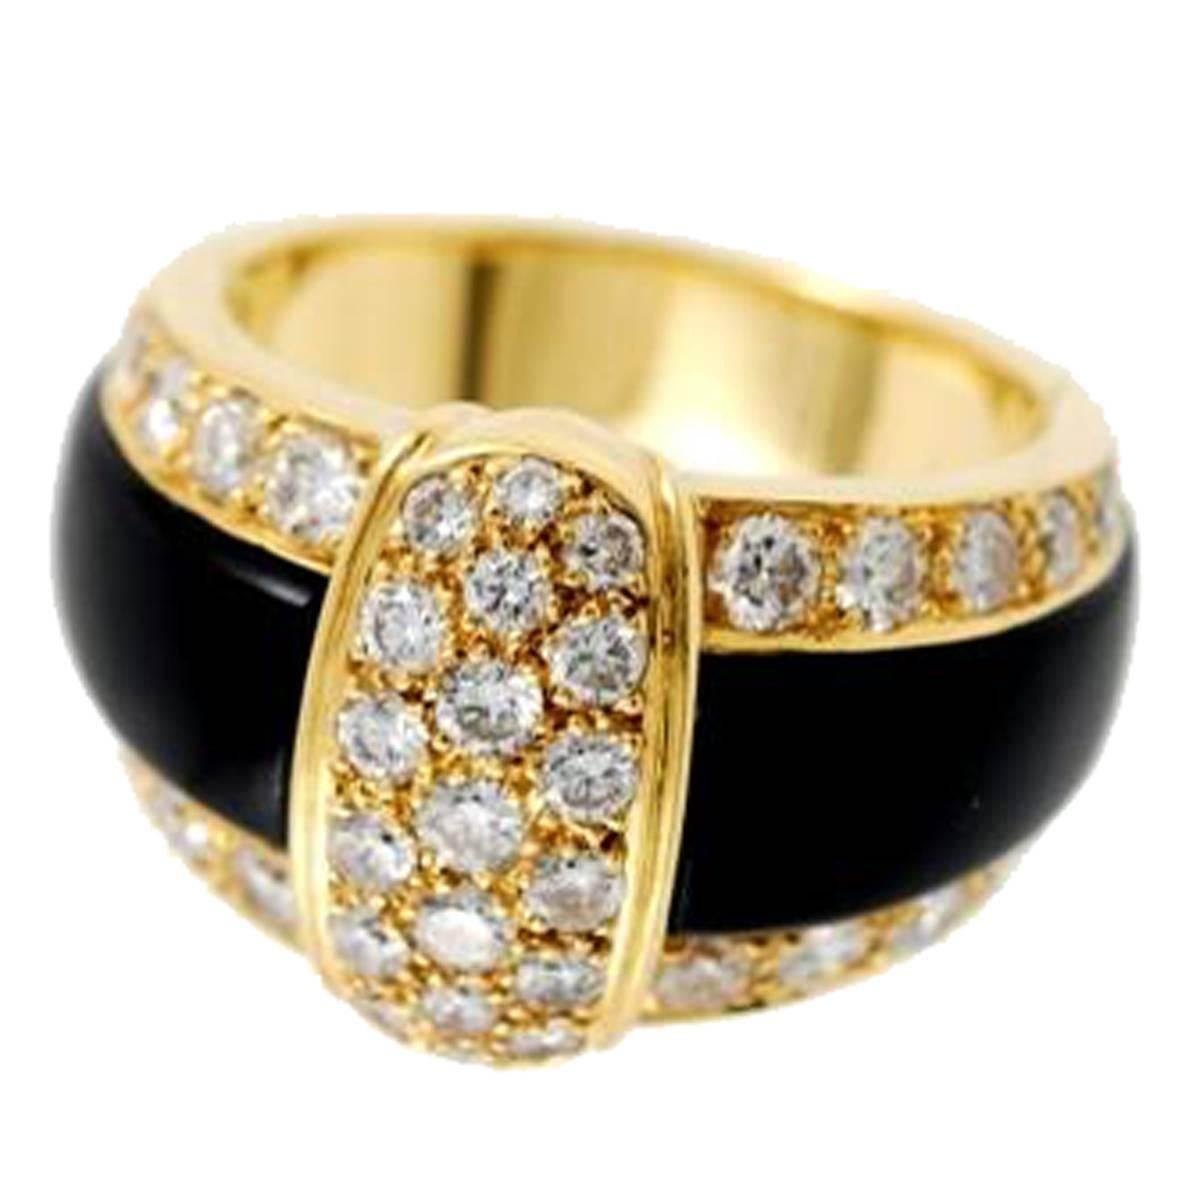 Van Cleef & Arpels Onyx Diamond Gold Band Ring For Sale